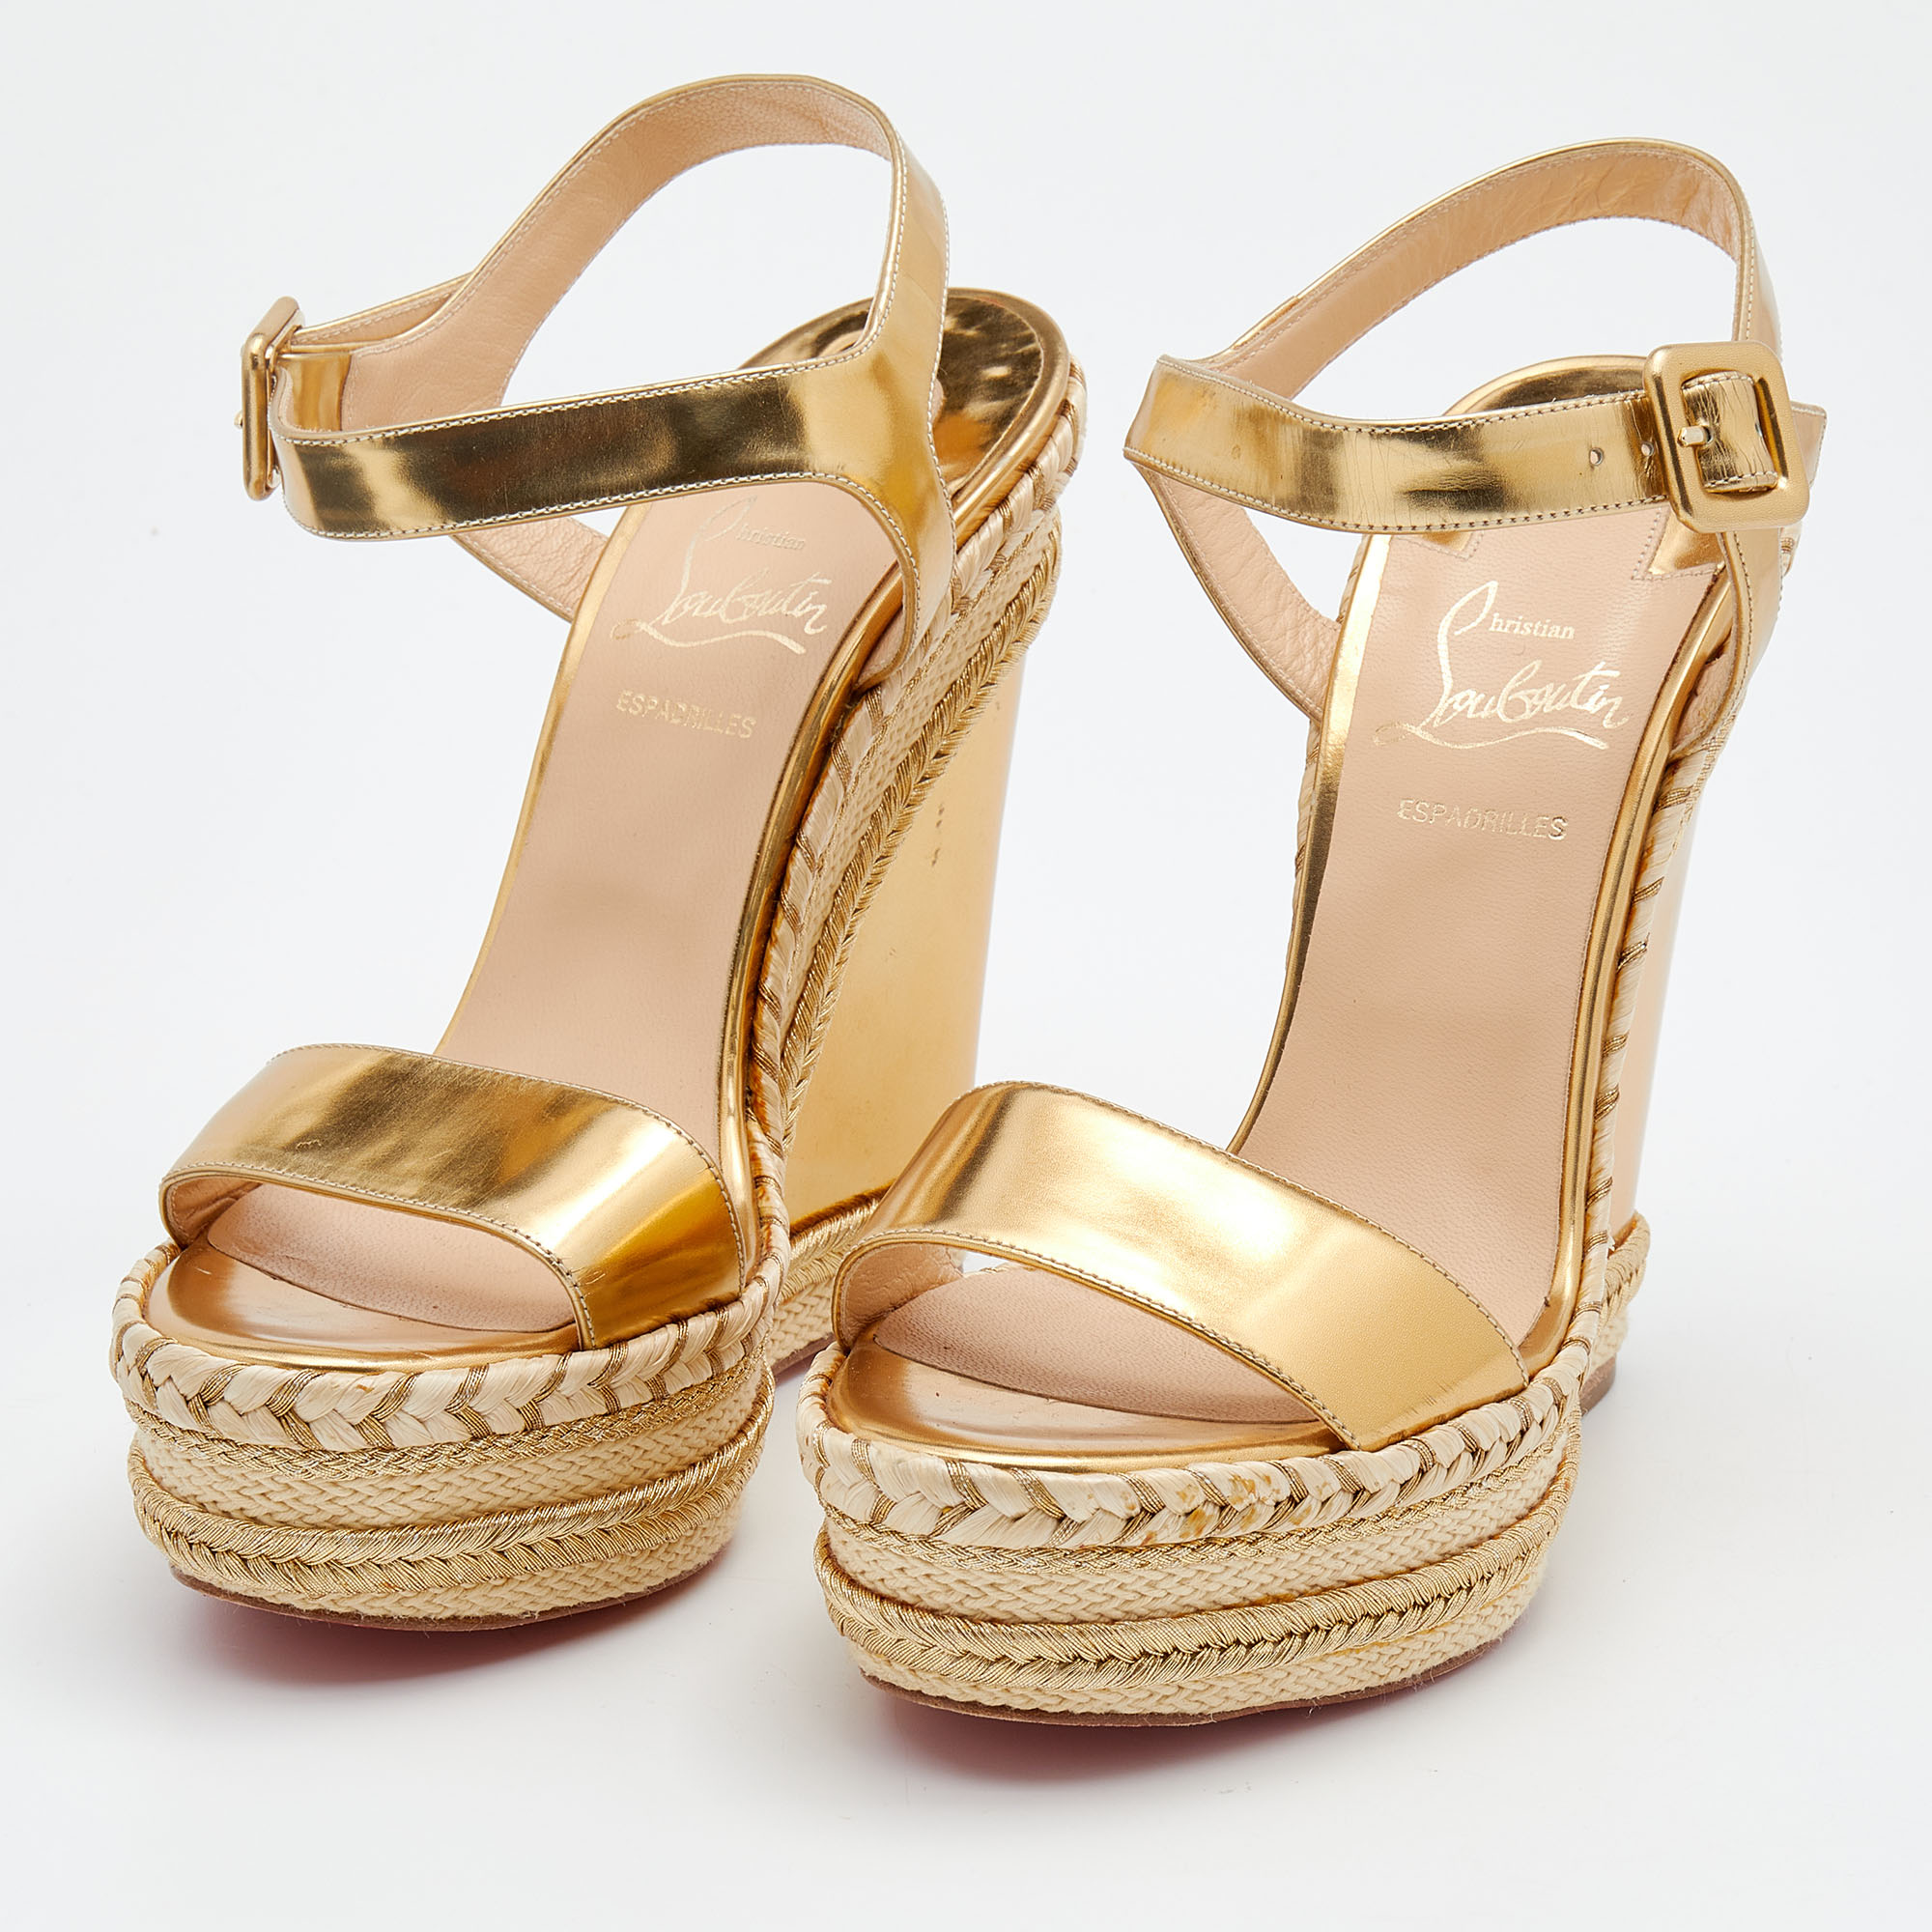 

Christian Louboutin Metallic Gold Leather New Duplice Ankle Strap Wedge Platform Sandals Size